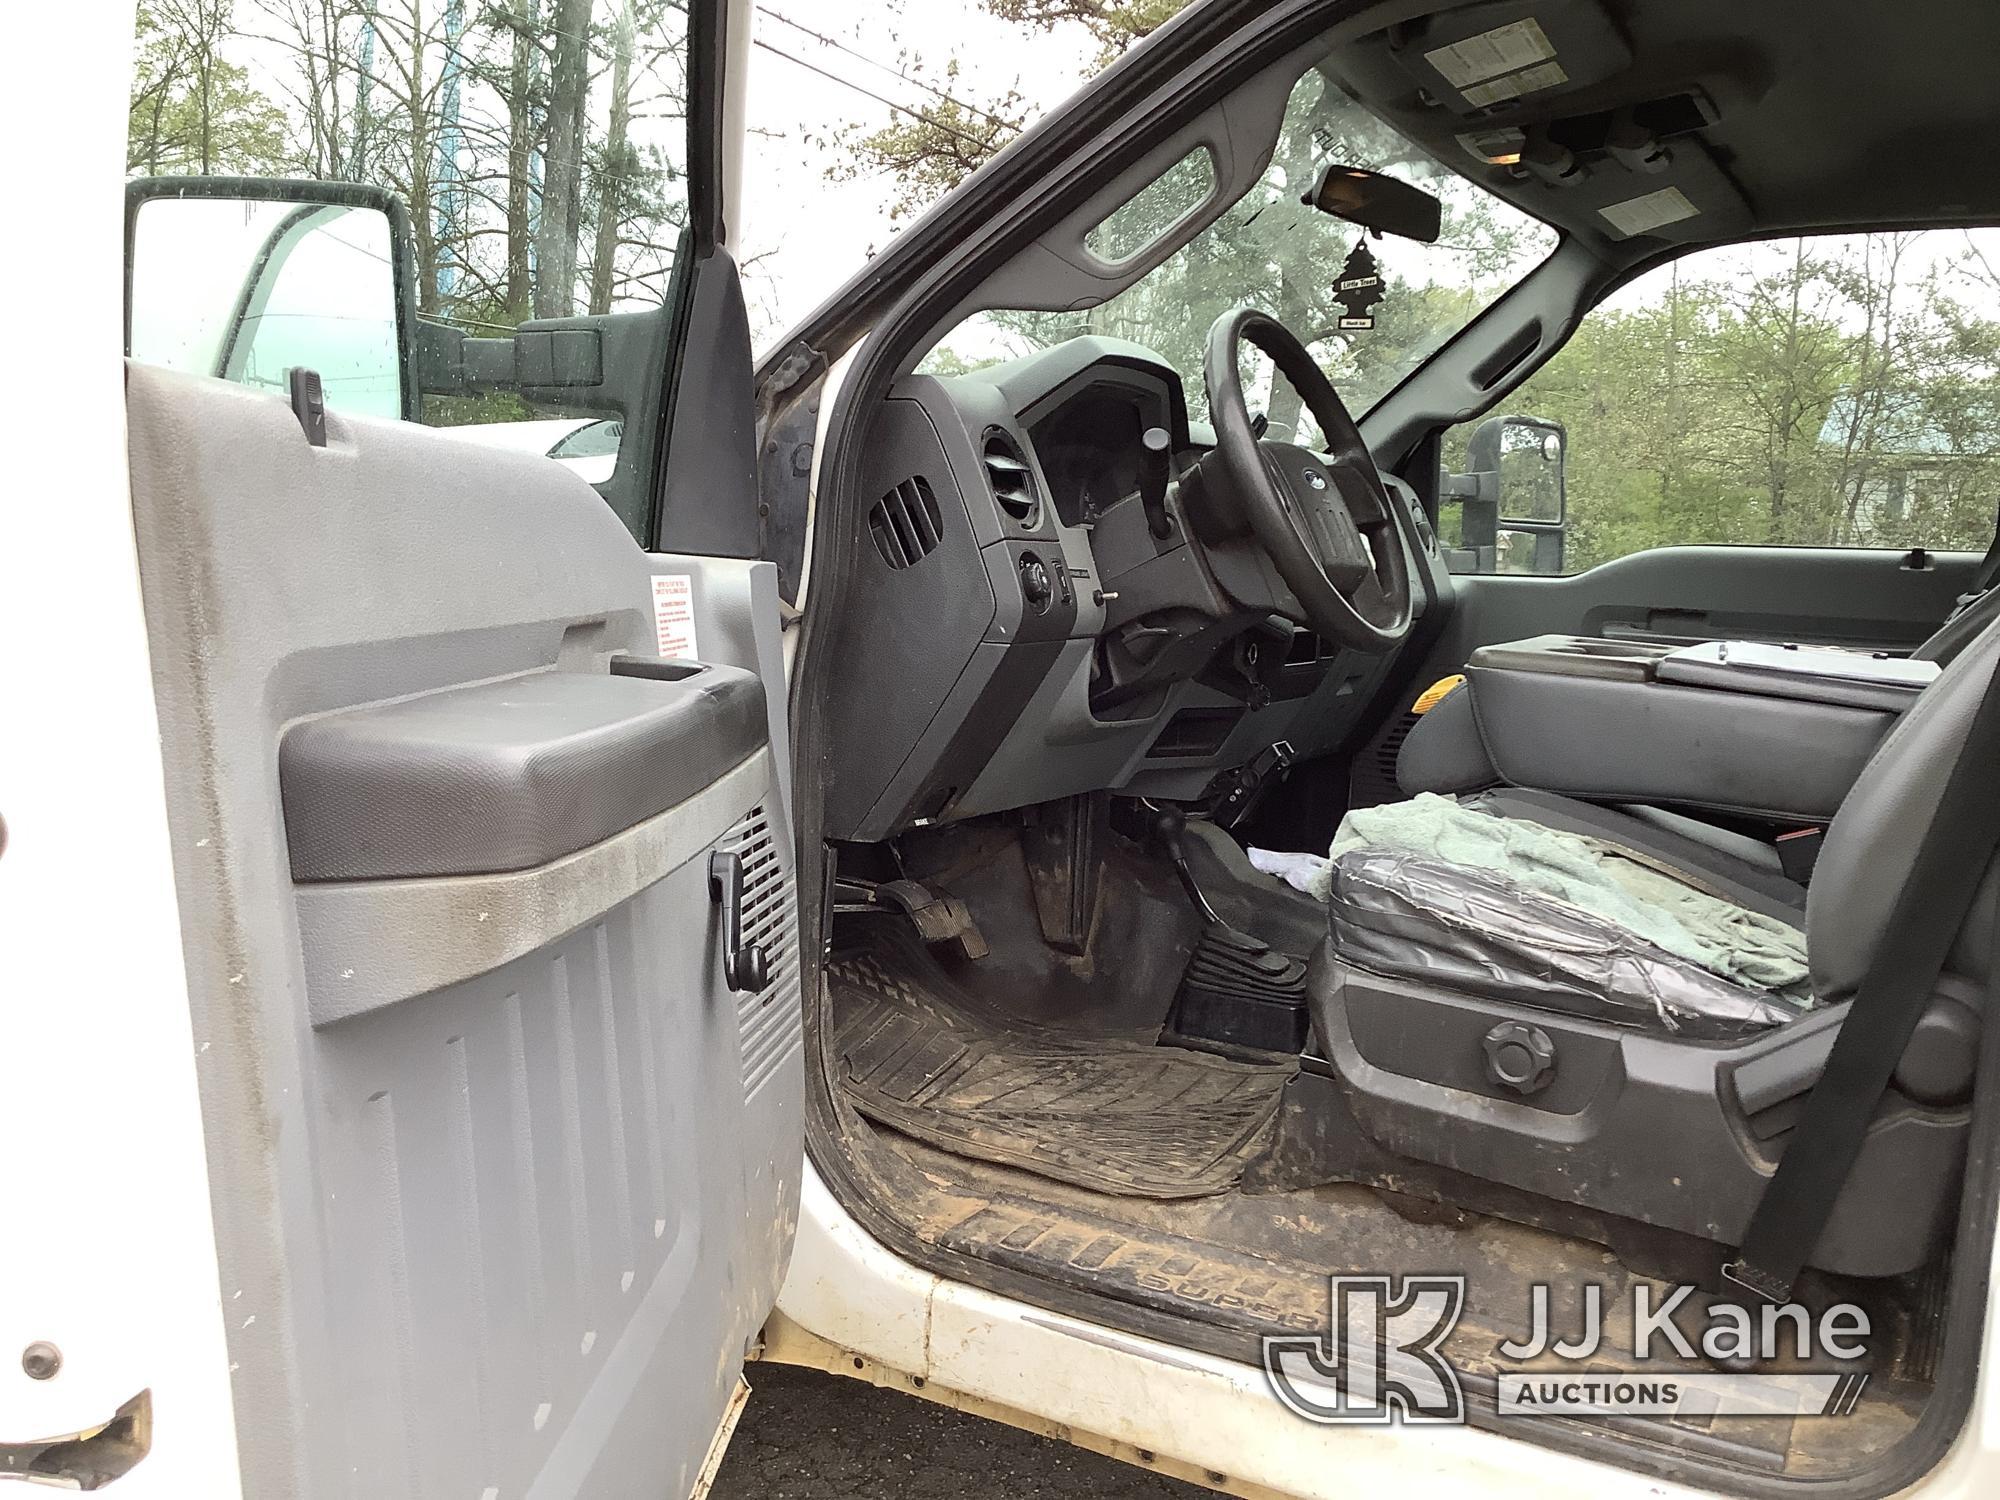 (Graysville, AL) 2016 Ford F250 4x4 Crew-Cab Pickup Truck, Transfer case is bad and needs brakes Run